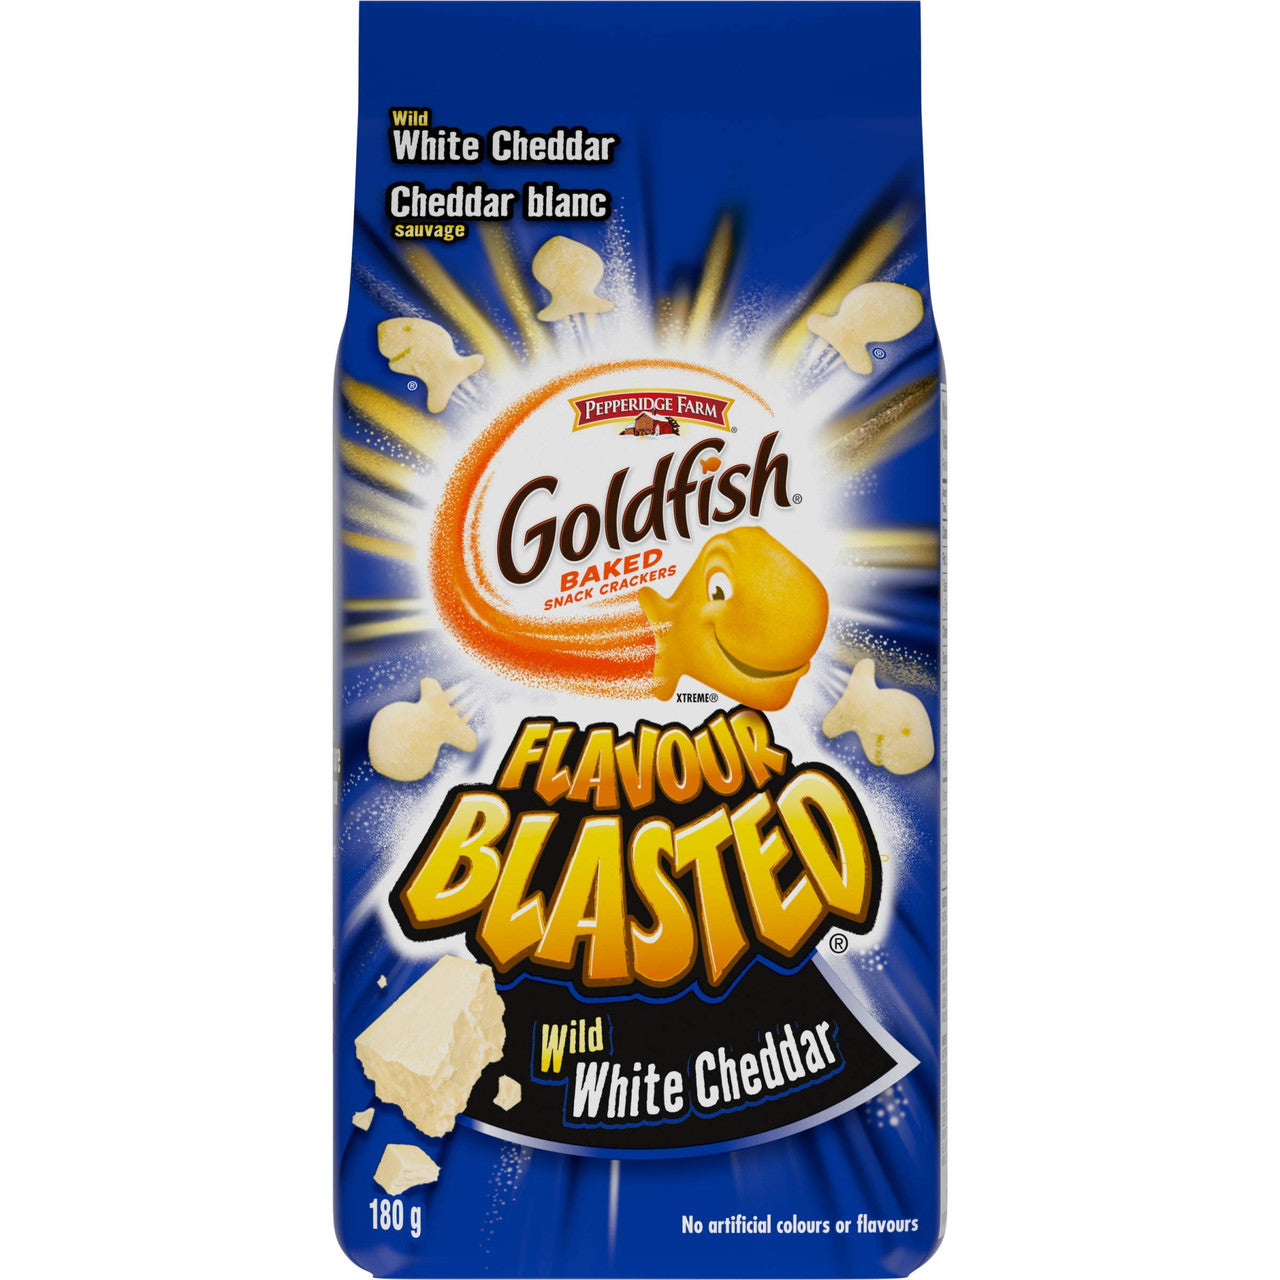 Goldfish Flavour Blasted Wild White Cheddar Crackers 180g/6.3oz, (Imported from Canada)